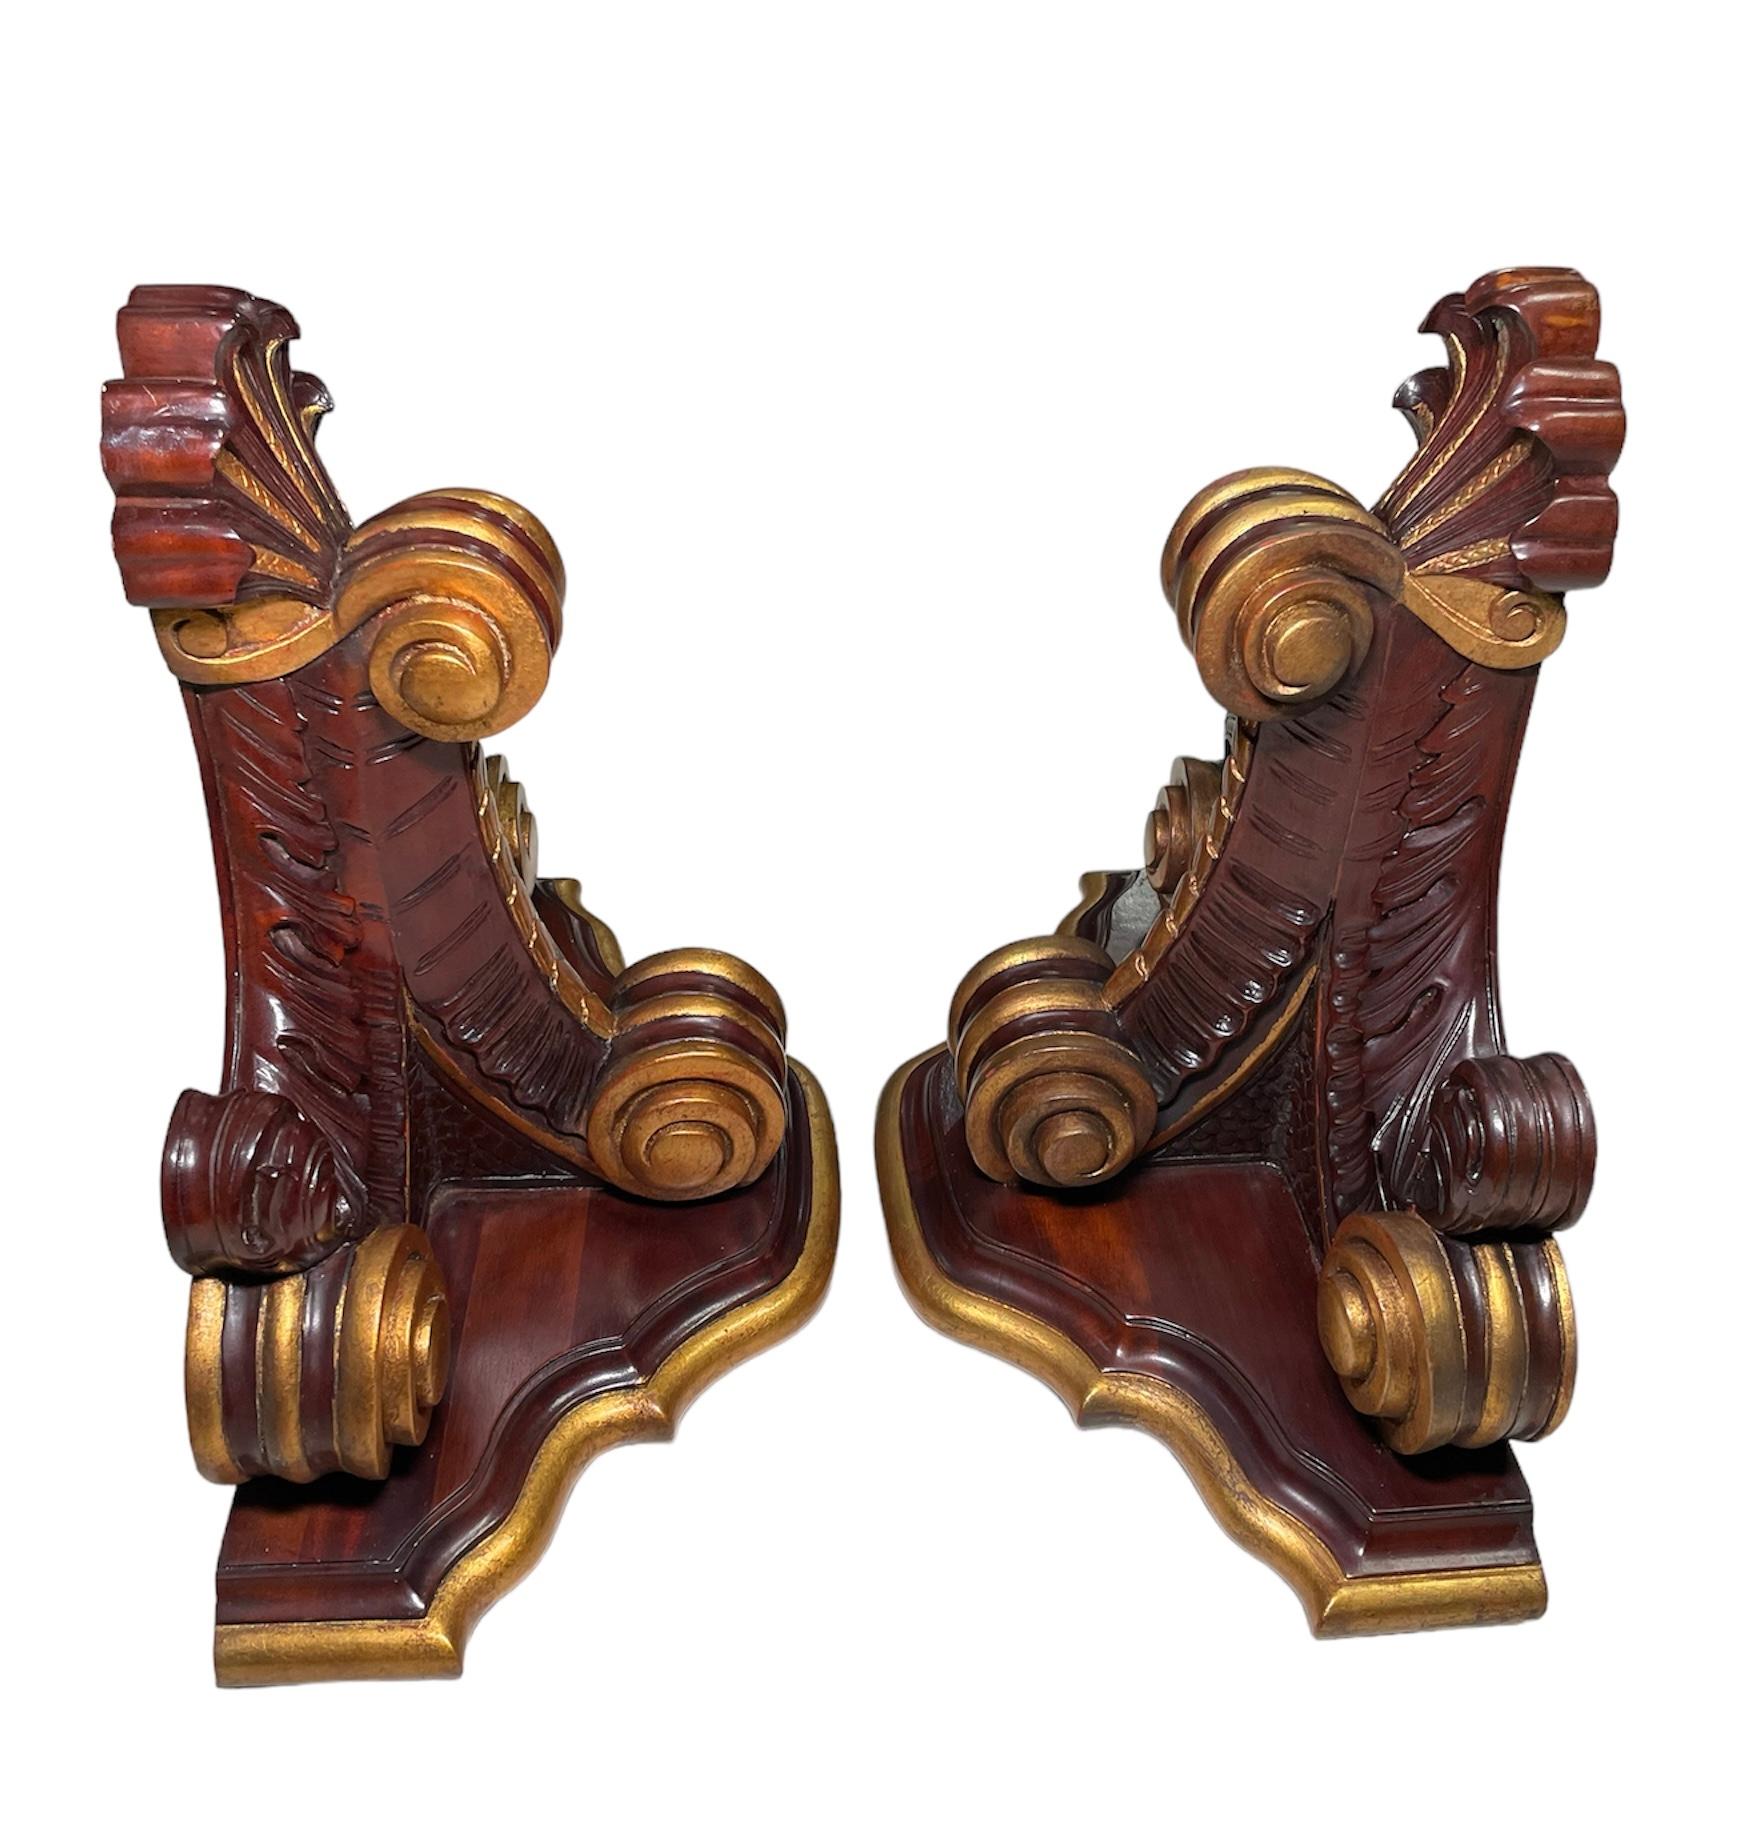 Rococo Style Pair Of Gilt Dark Wood Brackets/Shelves  In Good Condition For Sale In Guaynabo, PR